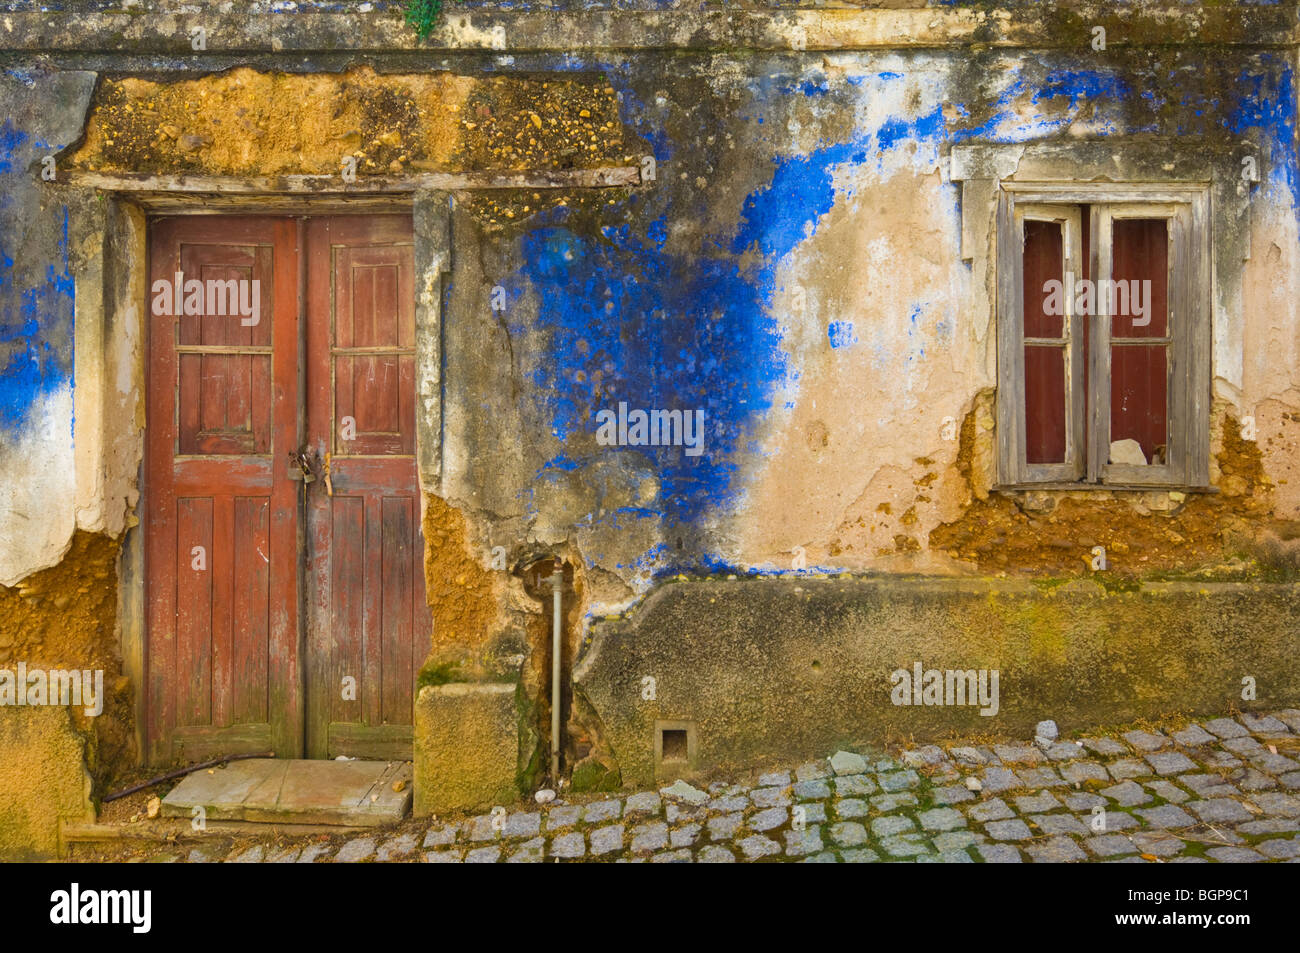 Old walls and door of a ruined blue painted cottage in the village of AljezurAlgarve district Portugal EU Europe Stock Photo